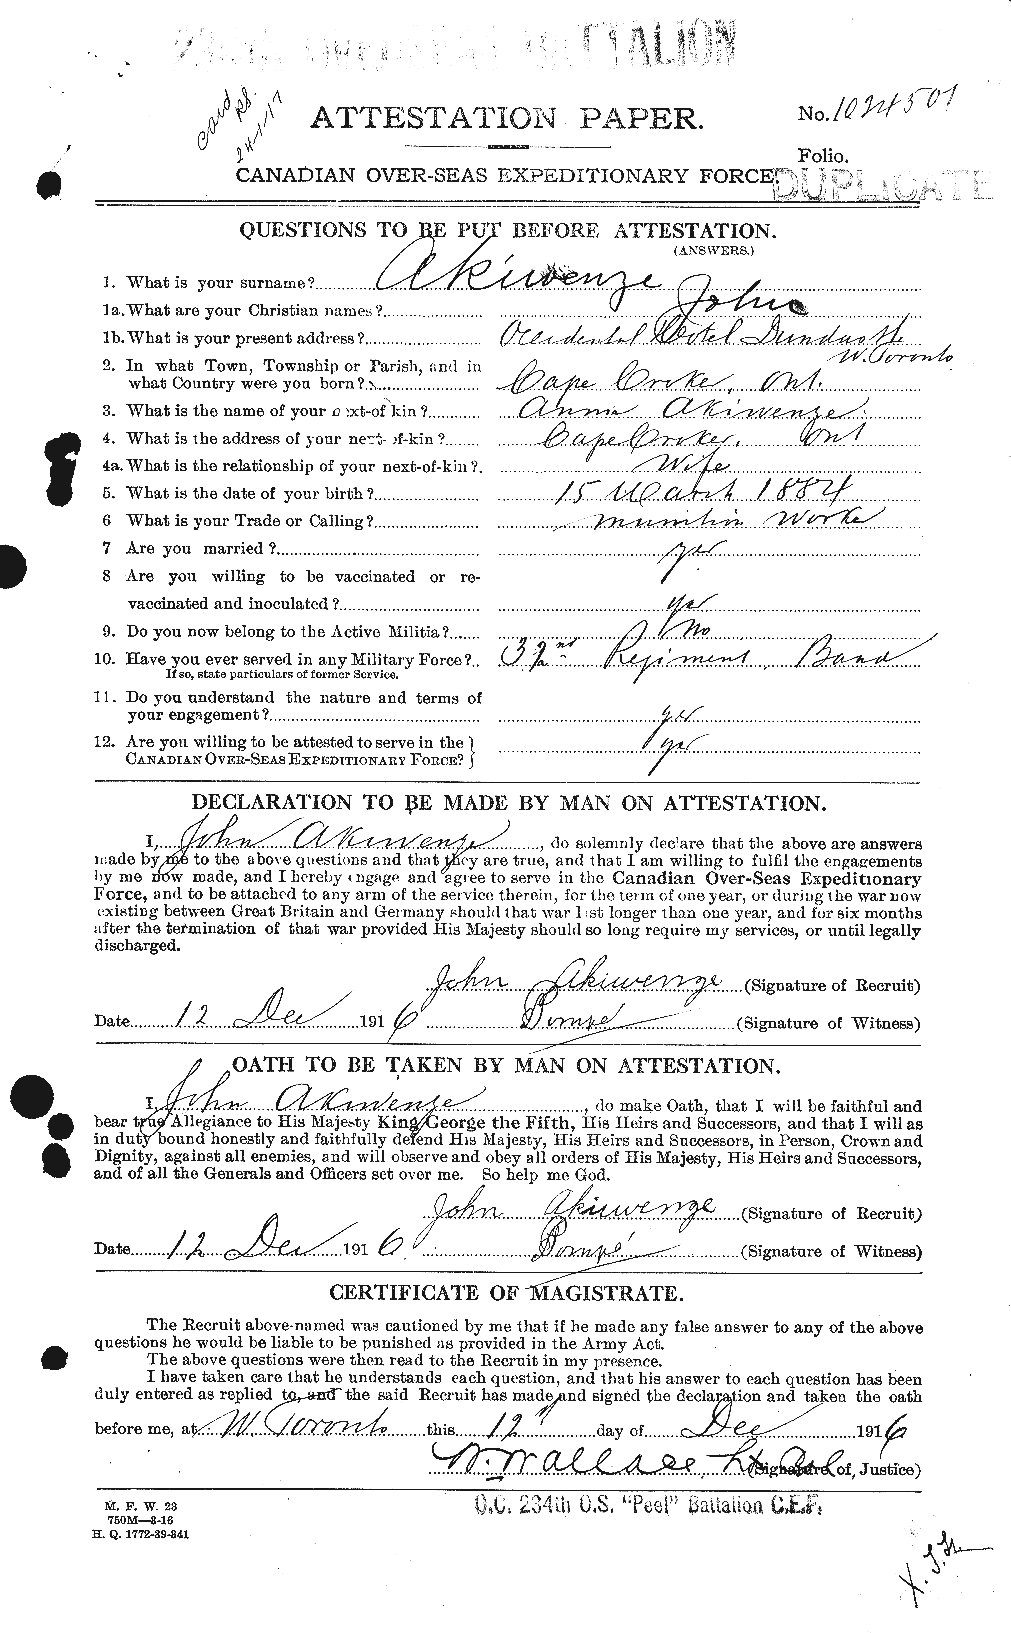 Personnel Records of the First World War - CEF 203591a